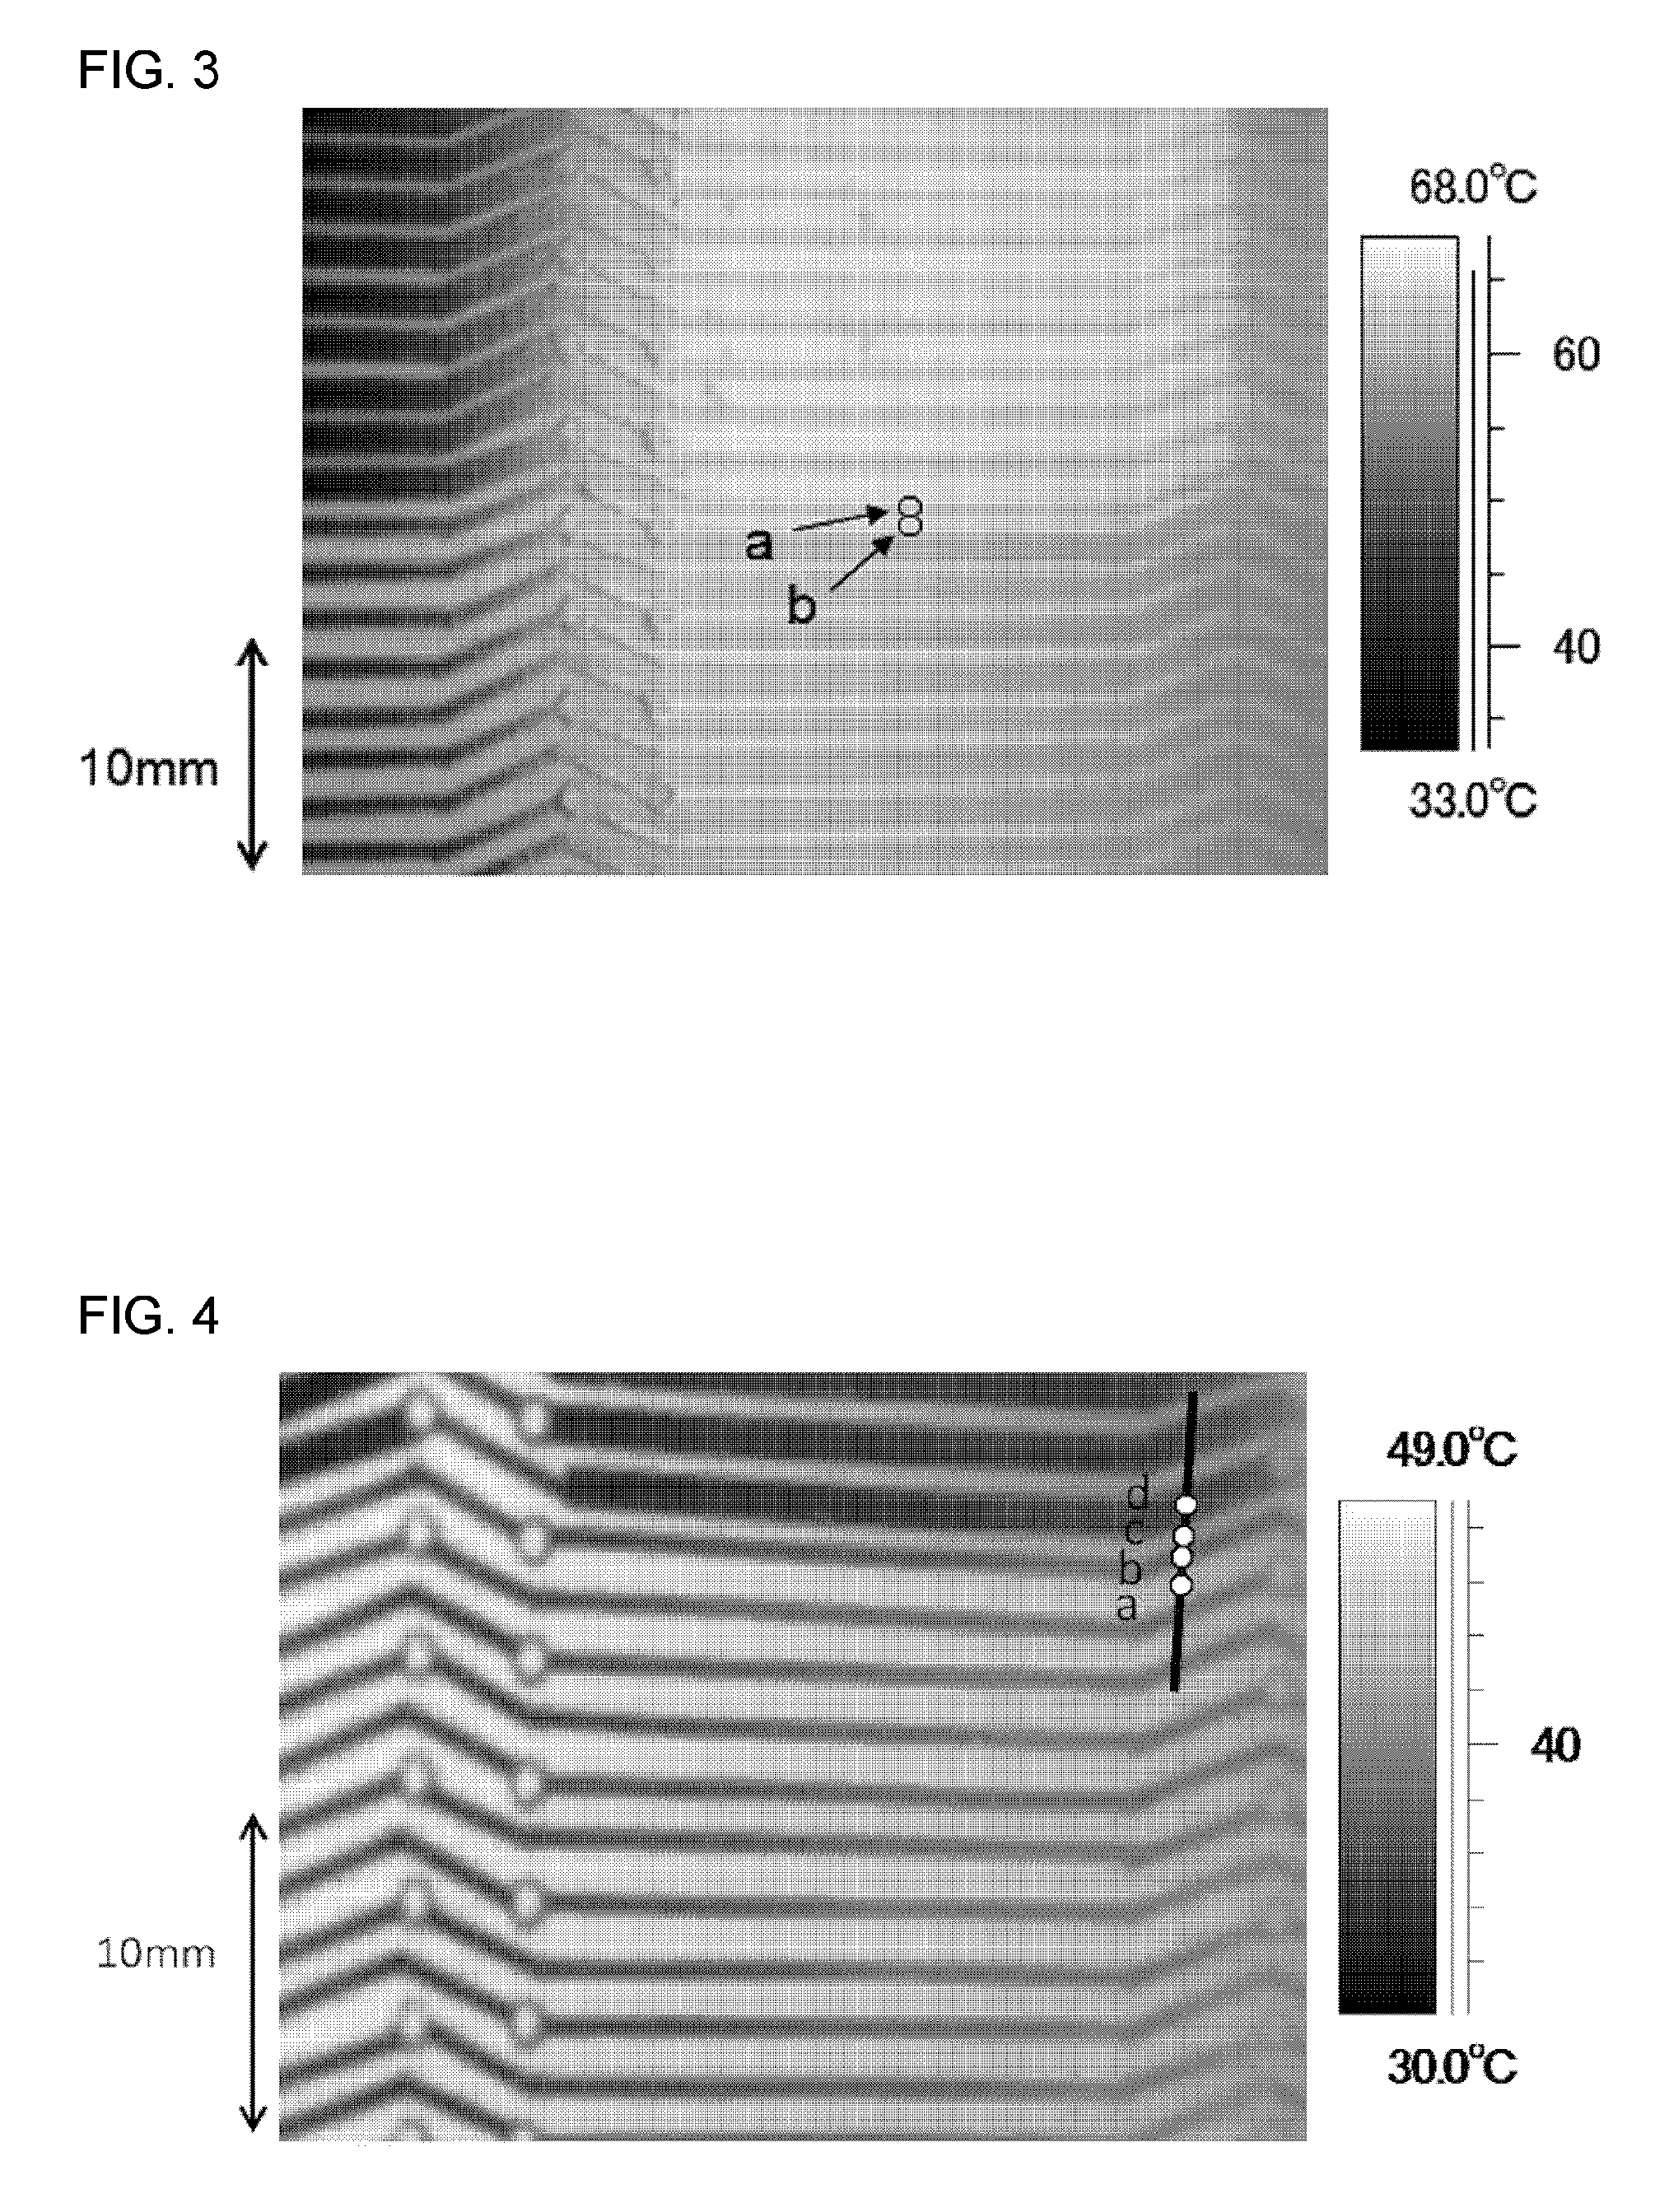 Method and system of measuring surface temperature